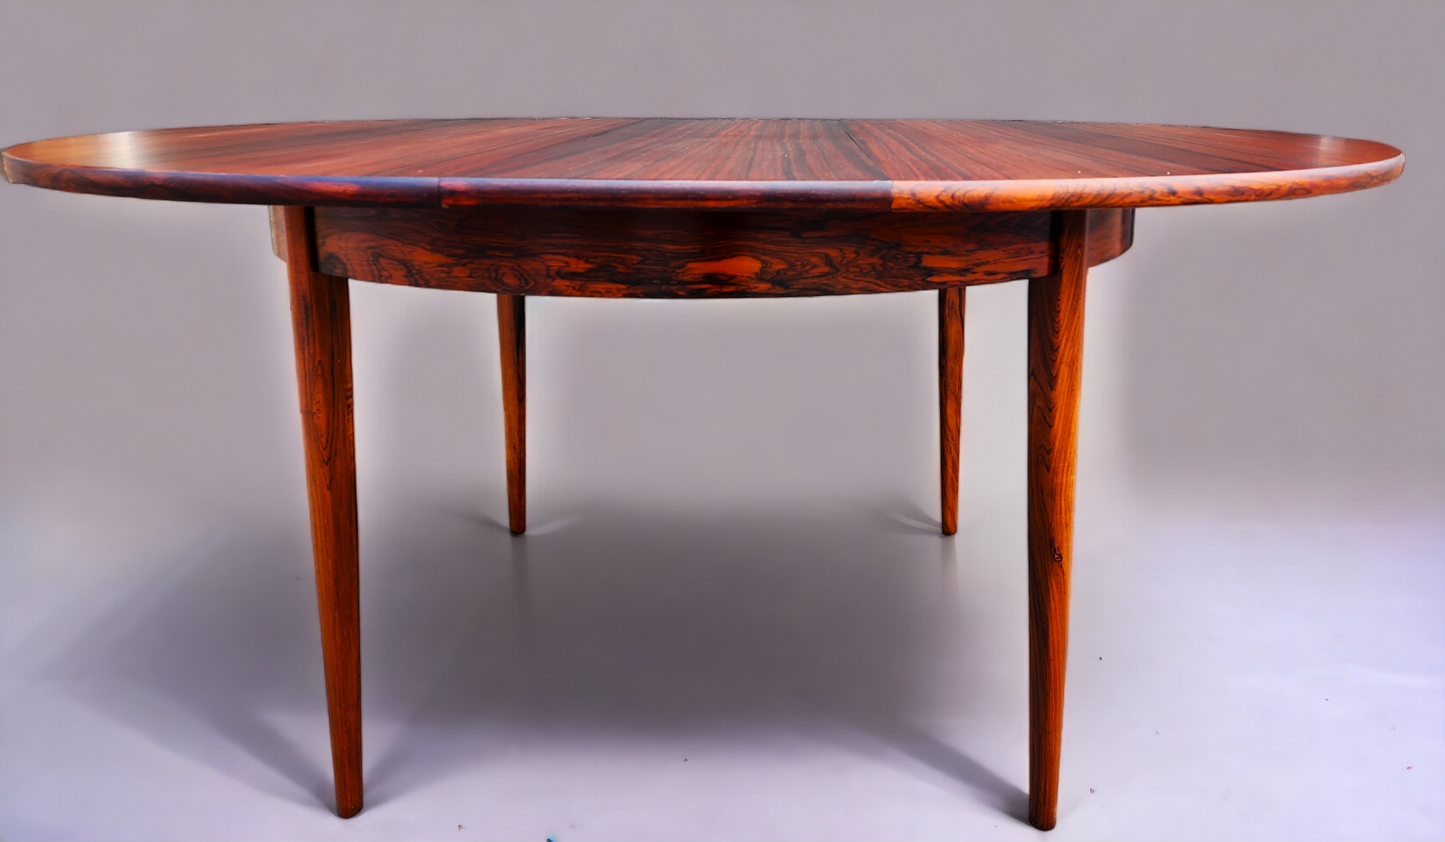 REFINISHED Danish MCM Rio Rosewood Table Round to Oval by Niels Moller 50"-78" Model 15, Selfstoring